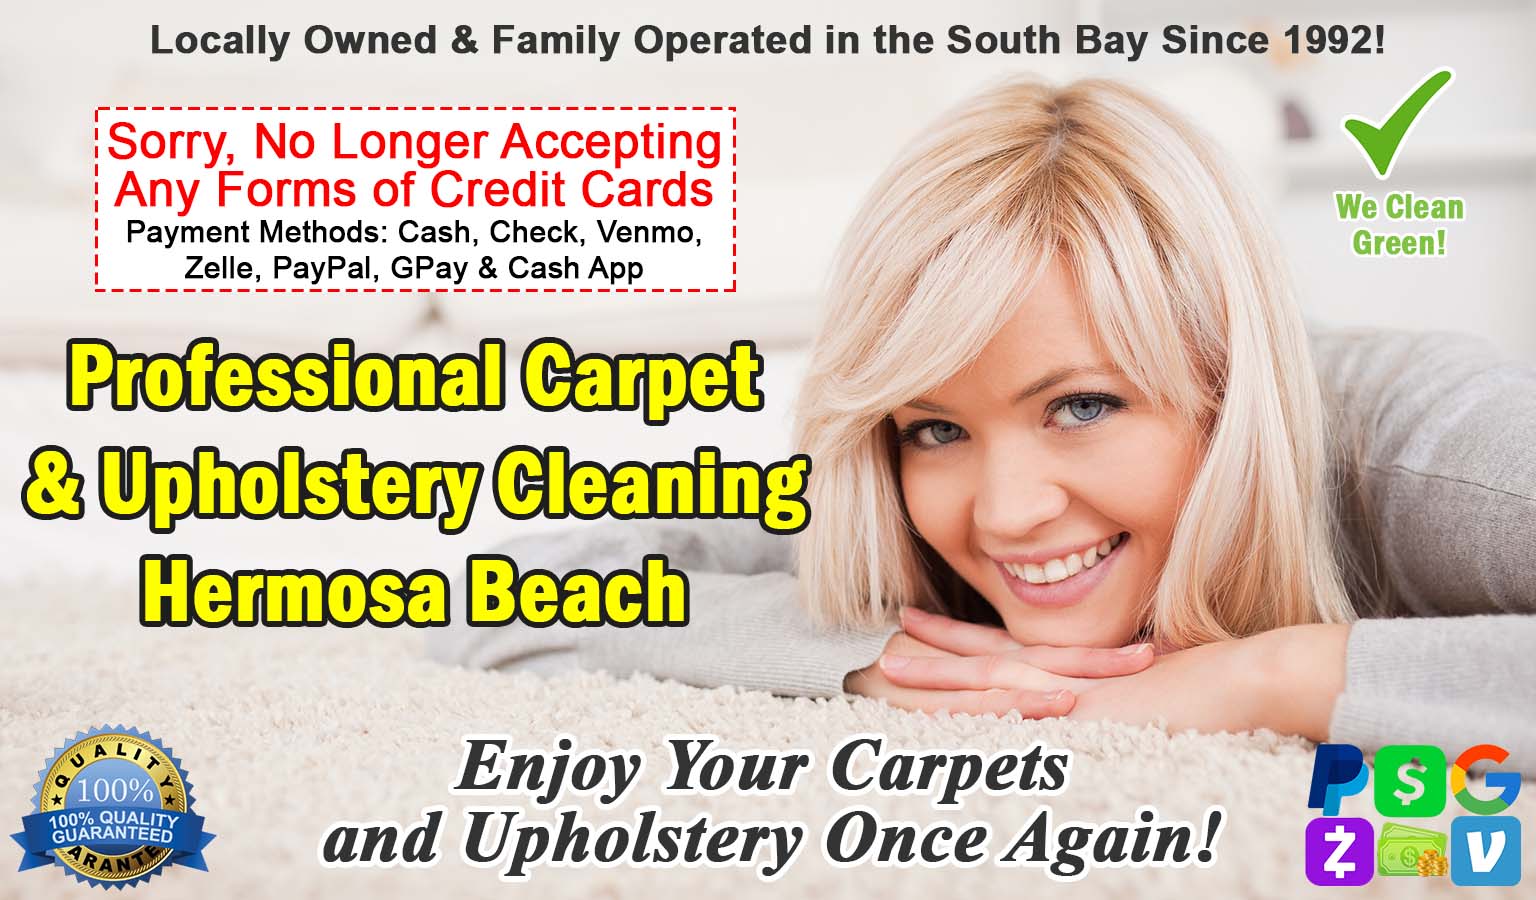 Carpet Cleaning and Upholstery Cleaning Hermosa Beach Ca